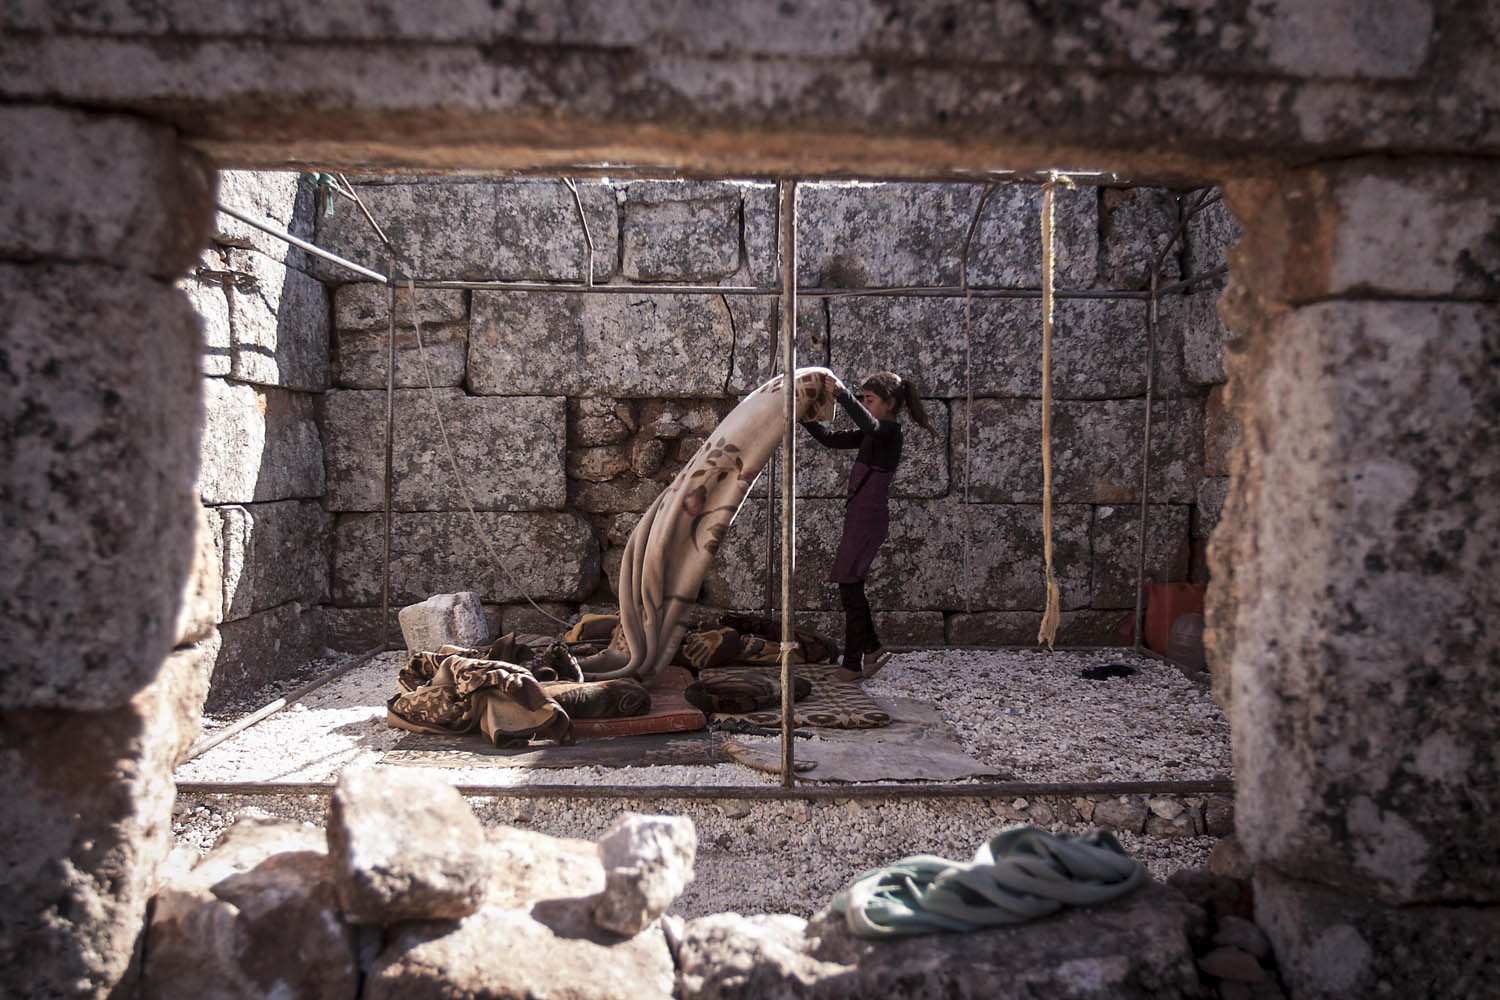 Sept. 27, 2013. A displaced Syrian girl makes her bed after waking up near Kafer Rouma, in ancient ruins used as temporary shelter by those families who have fled from the heavy fighting and shelling in the Idlib province countryside of Syria.